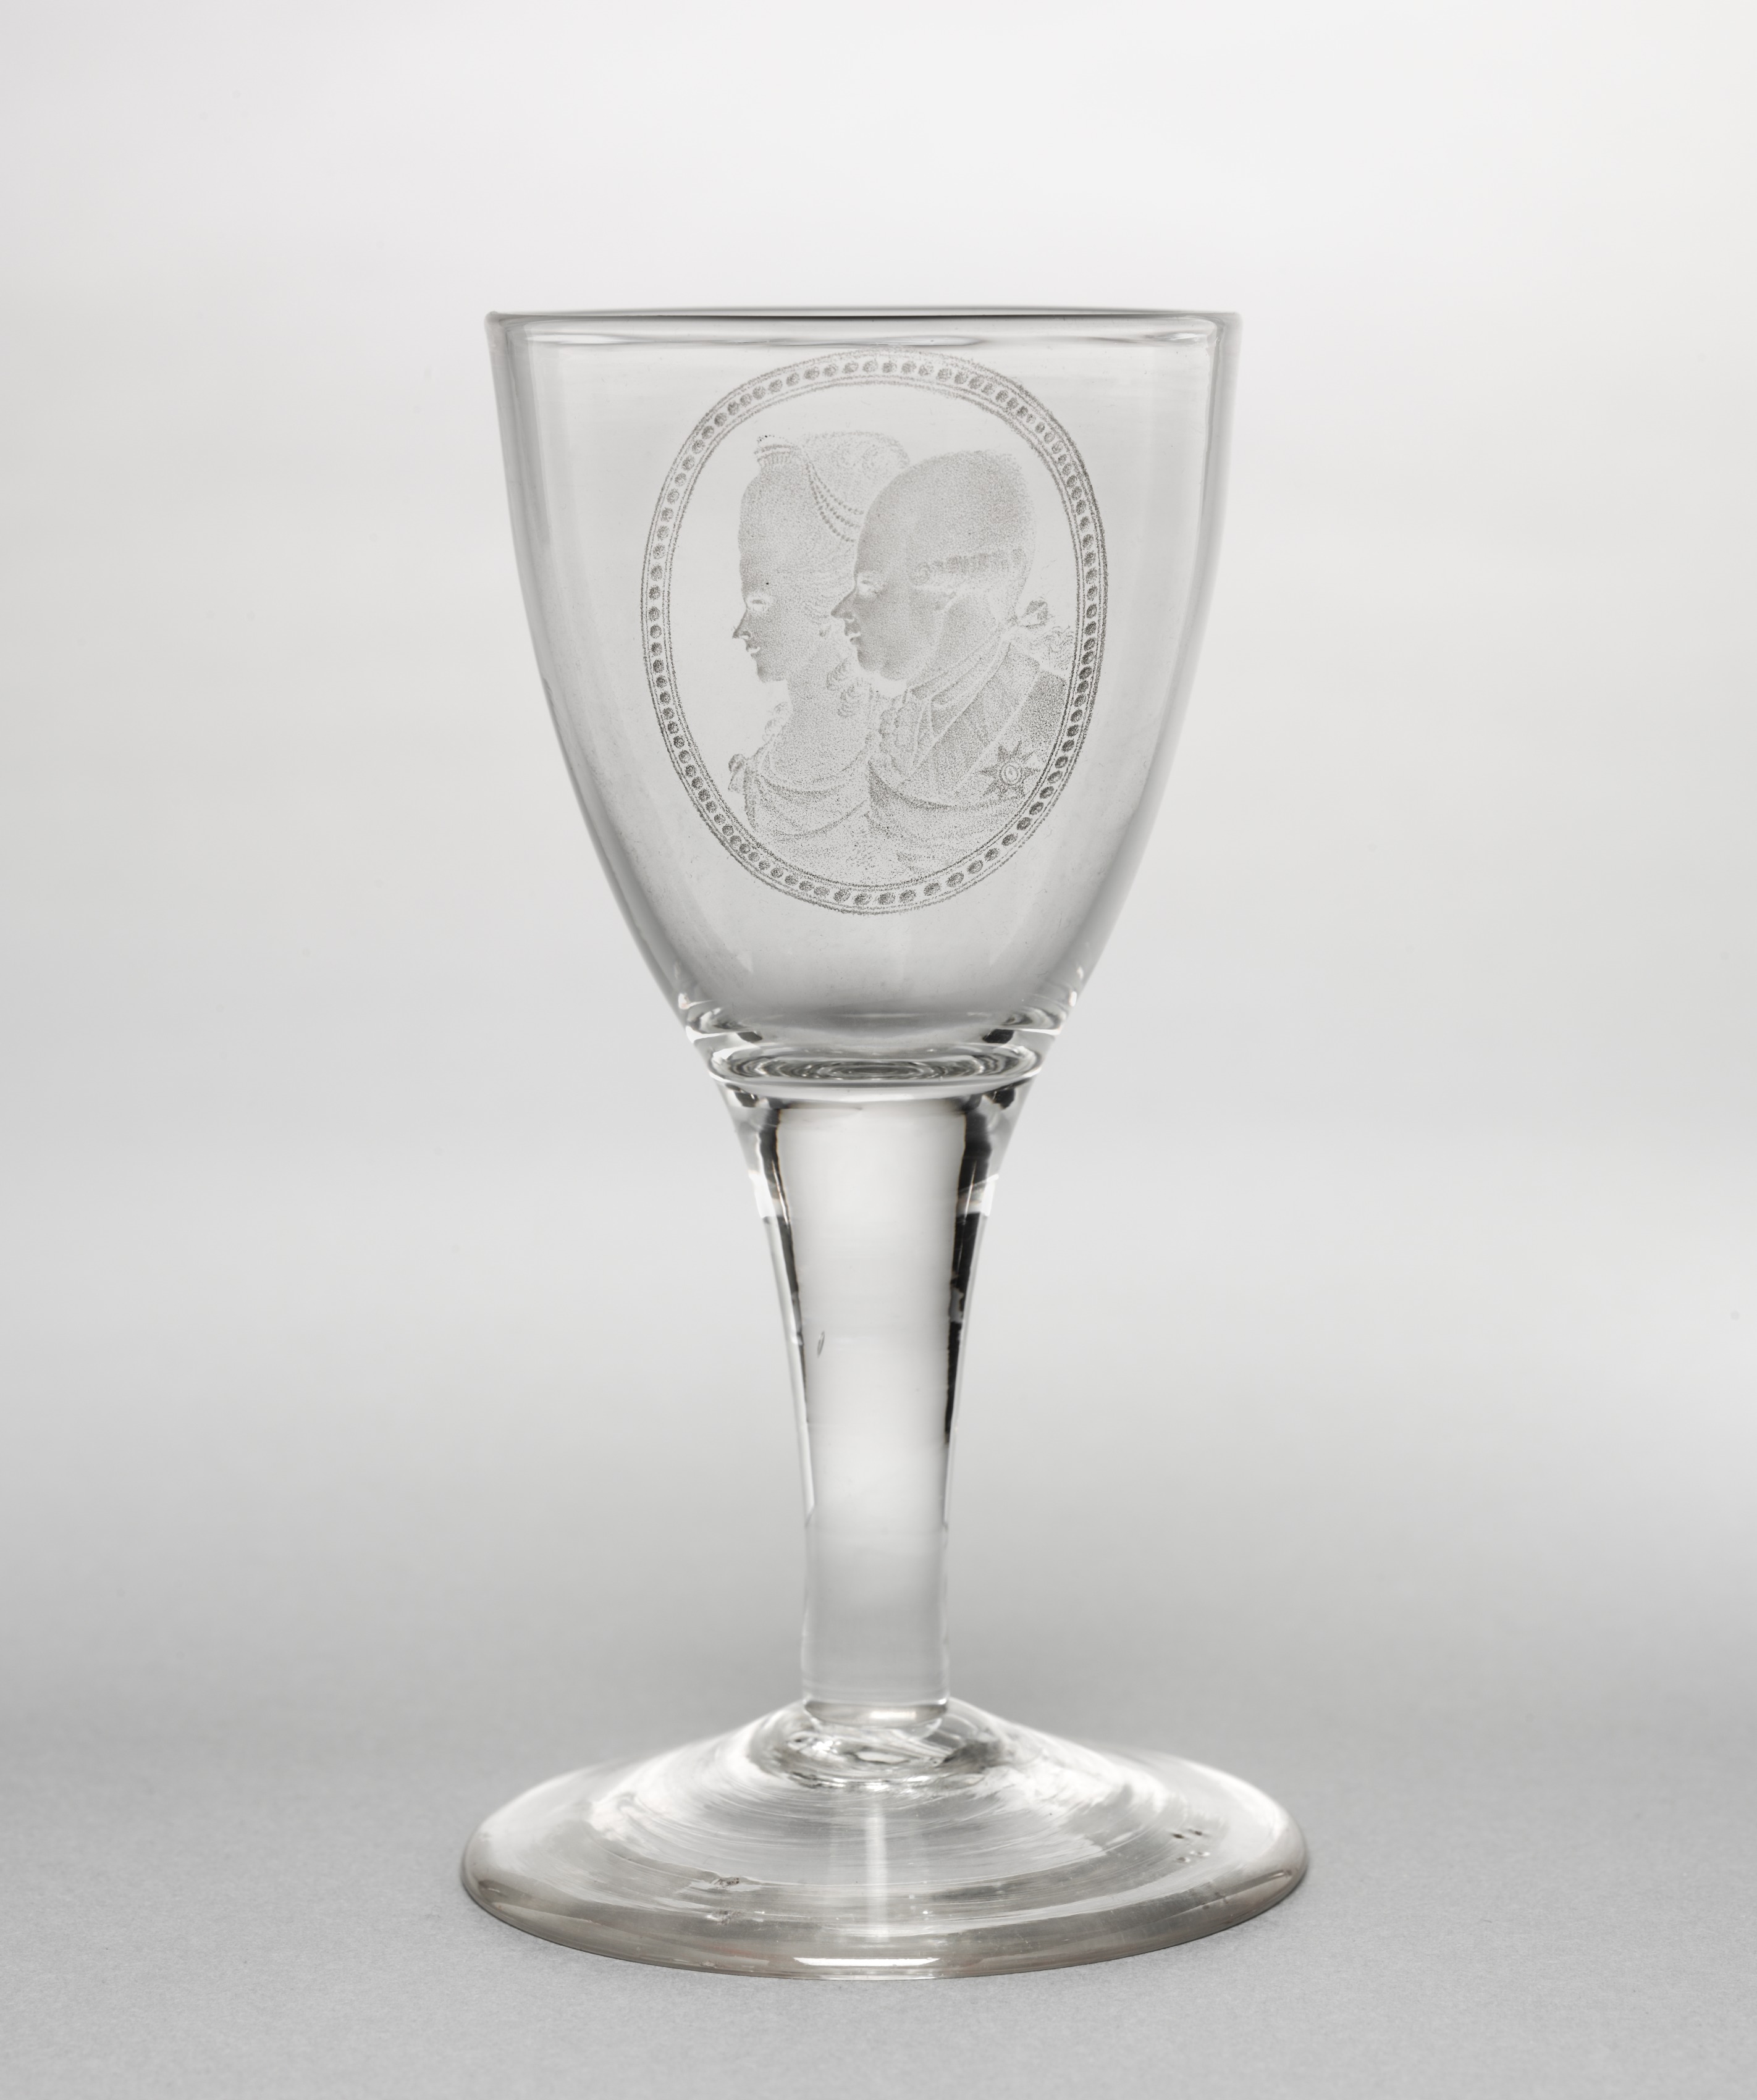 Goblet: Portrait of William V, Prince of Orange and his wife, Frederica Sophia Wilhelmine of Prussia